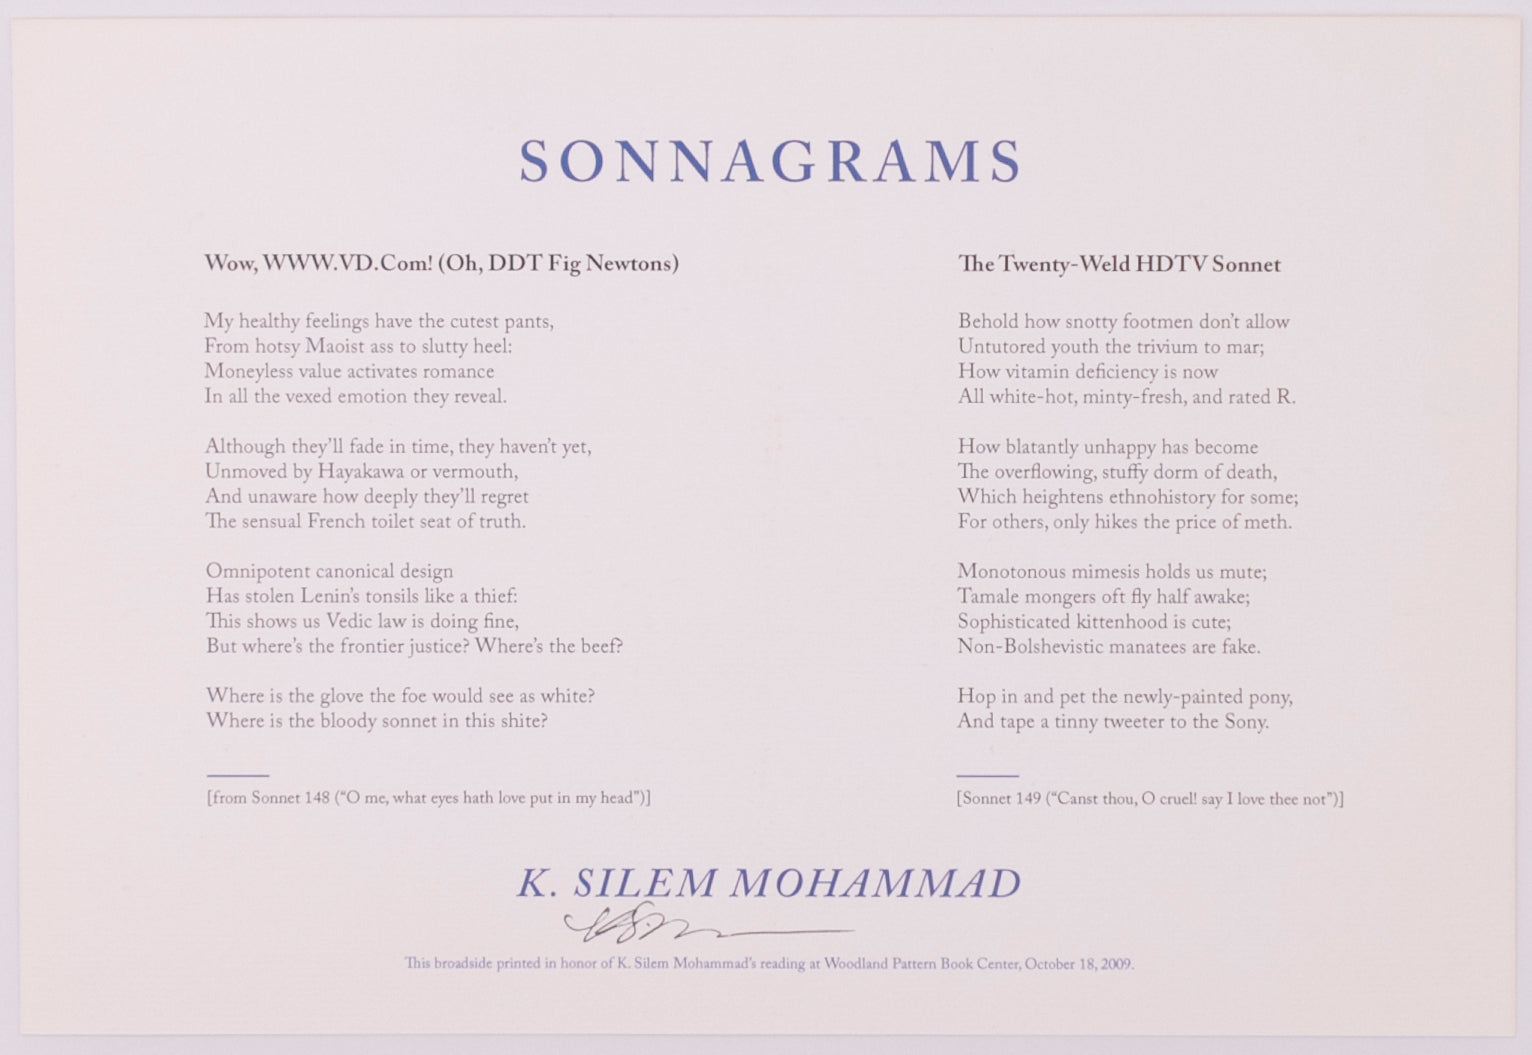 Broadside titled Sonnagrams by K. Silem Mohammad. Blue and black text on grey paper.